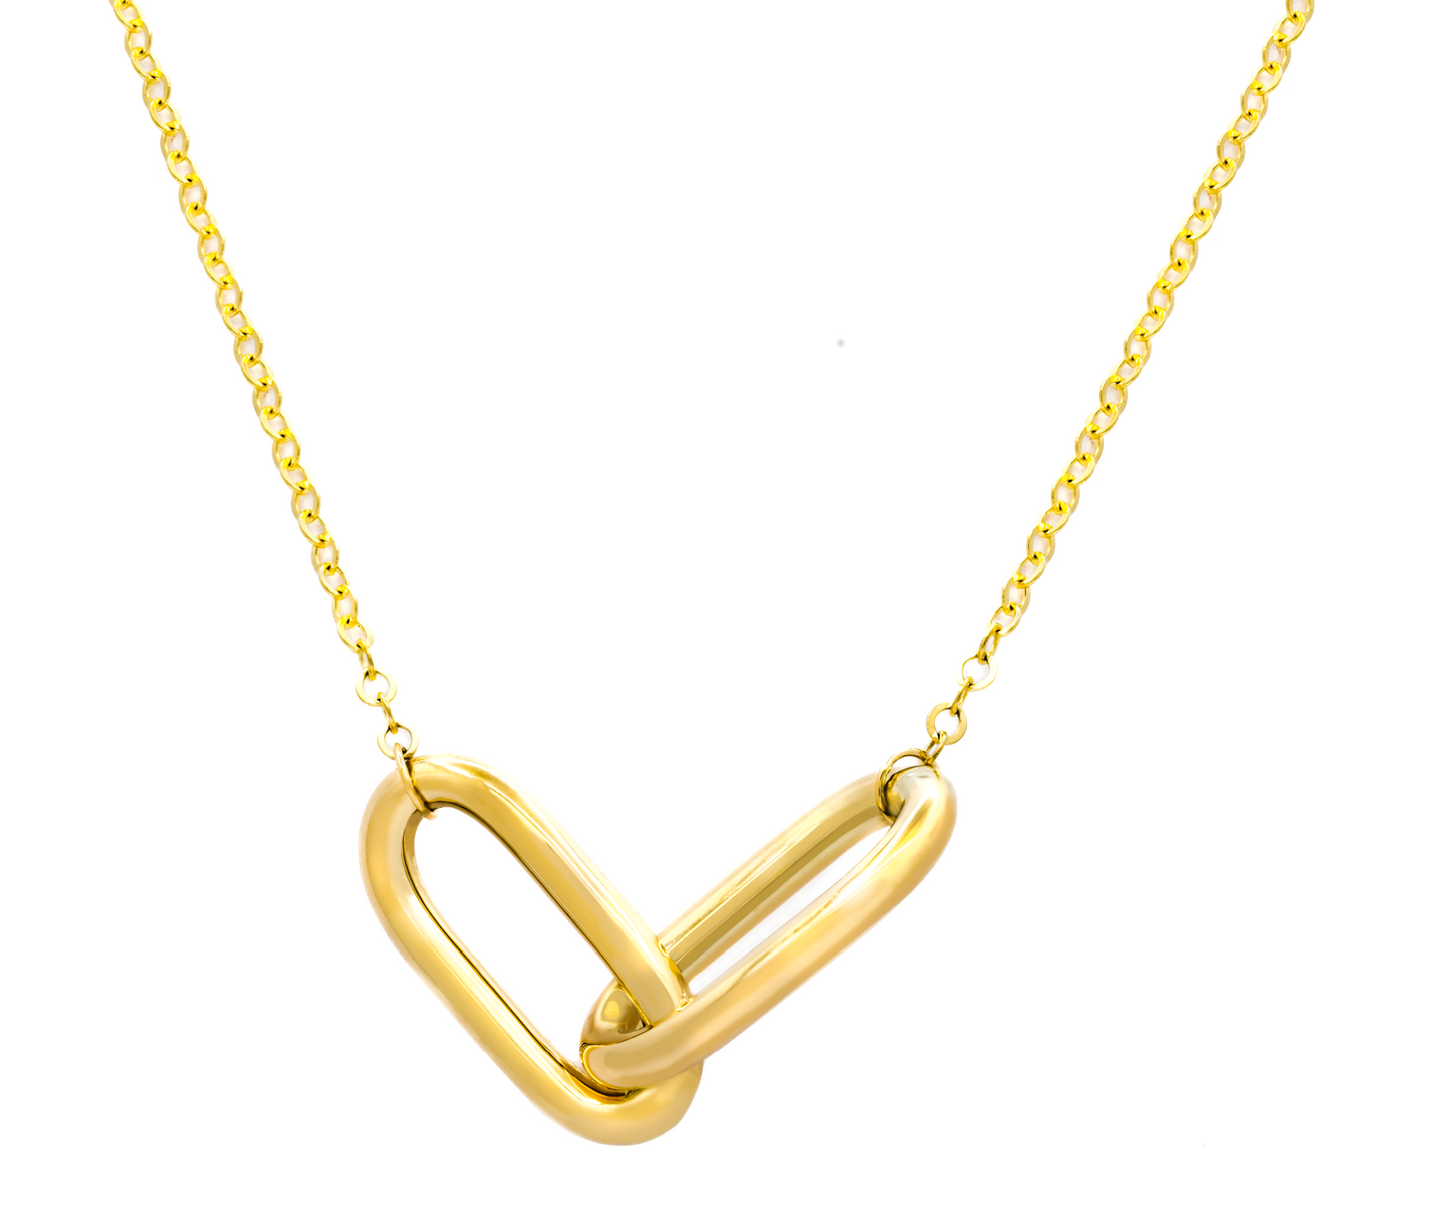 Large Double Oval Link Necklace